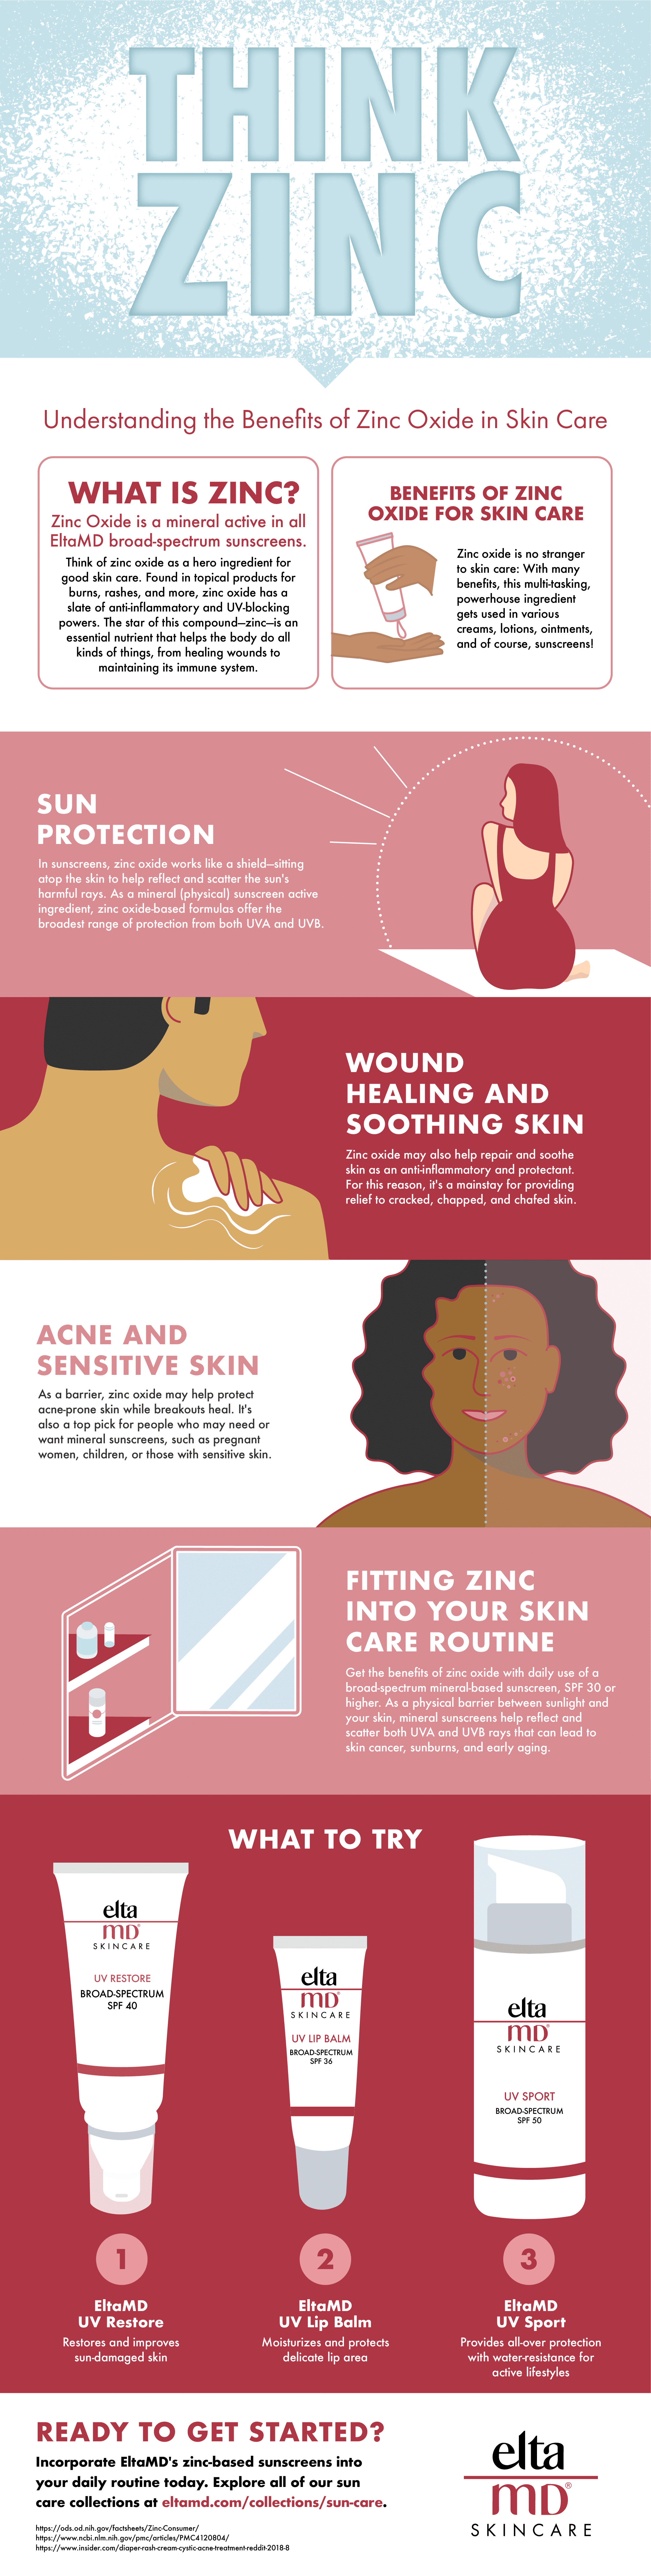 The Benefits of Zinc Oxide for Skin